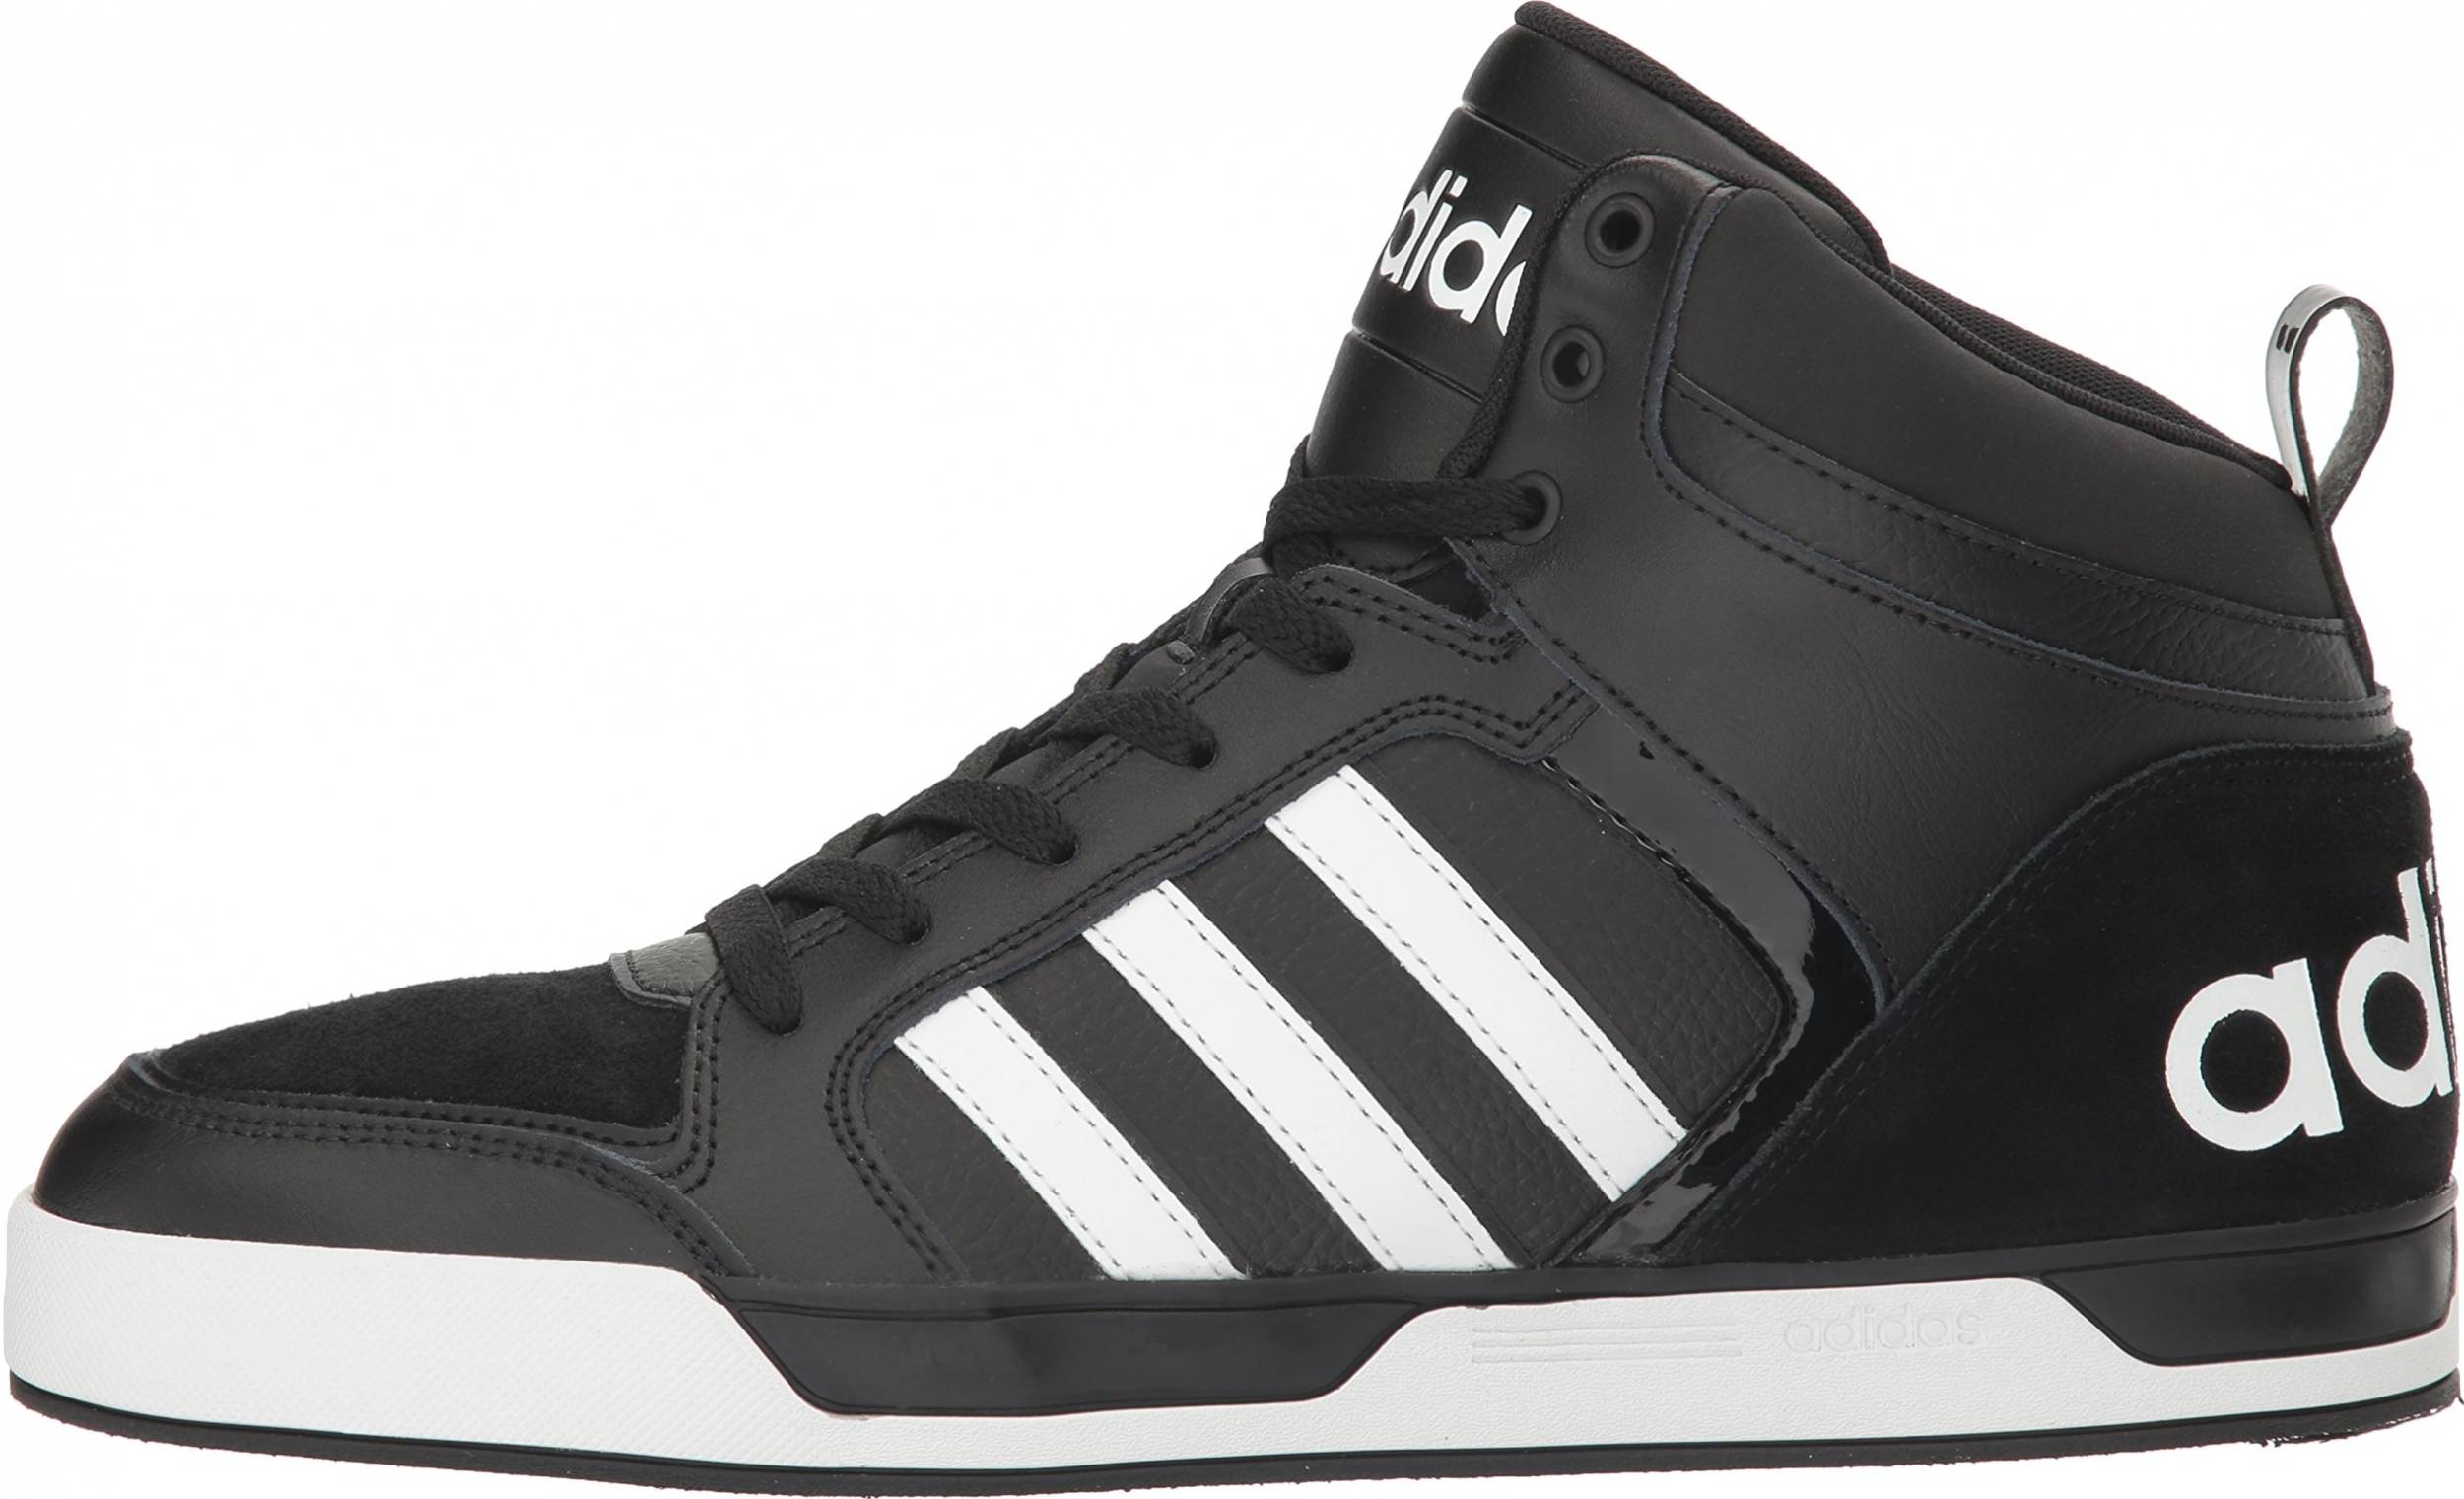 adidas dare neo sneakers black casual shoes